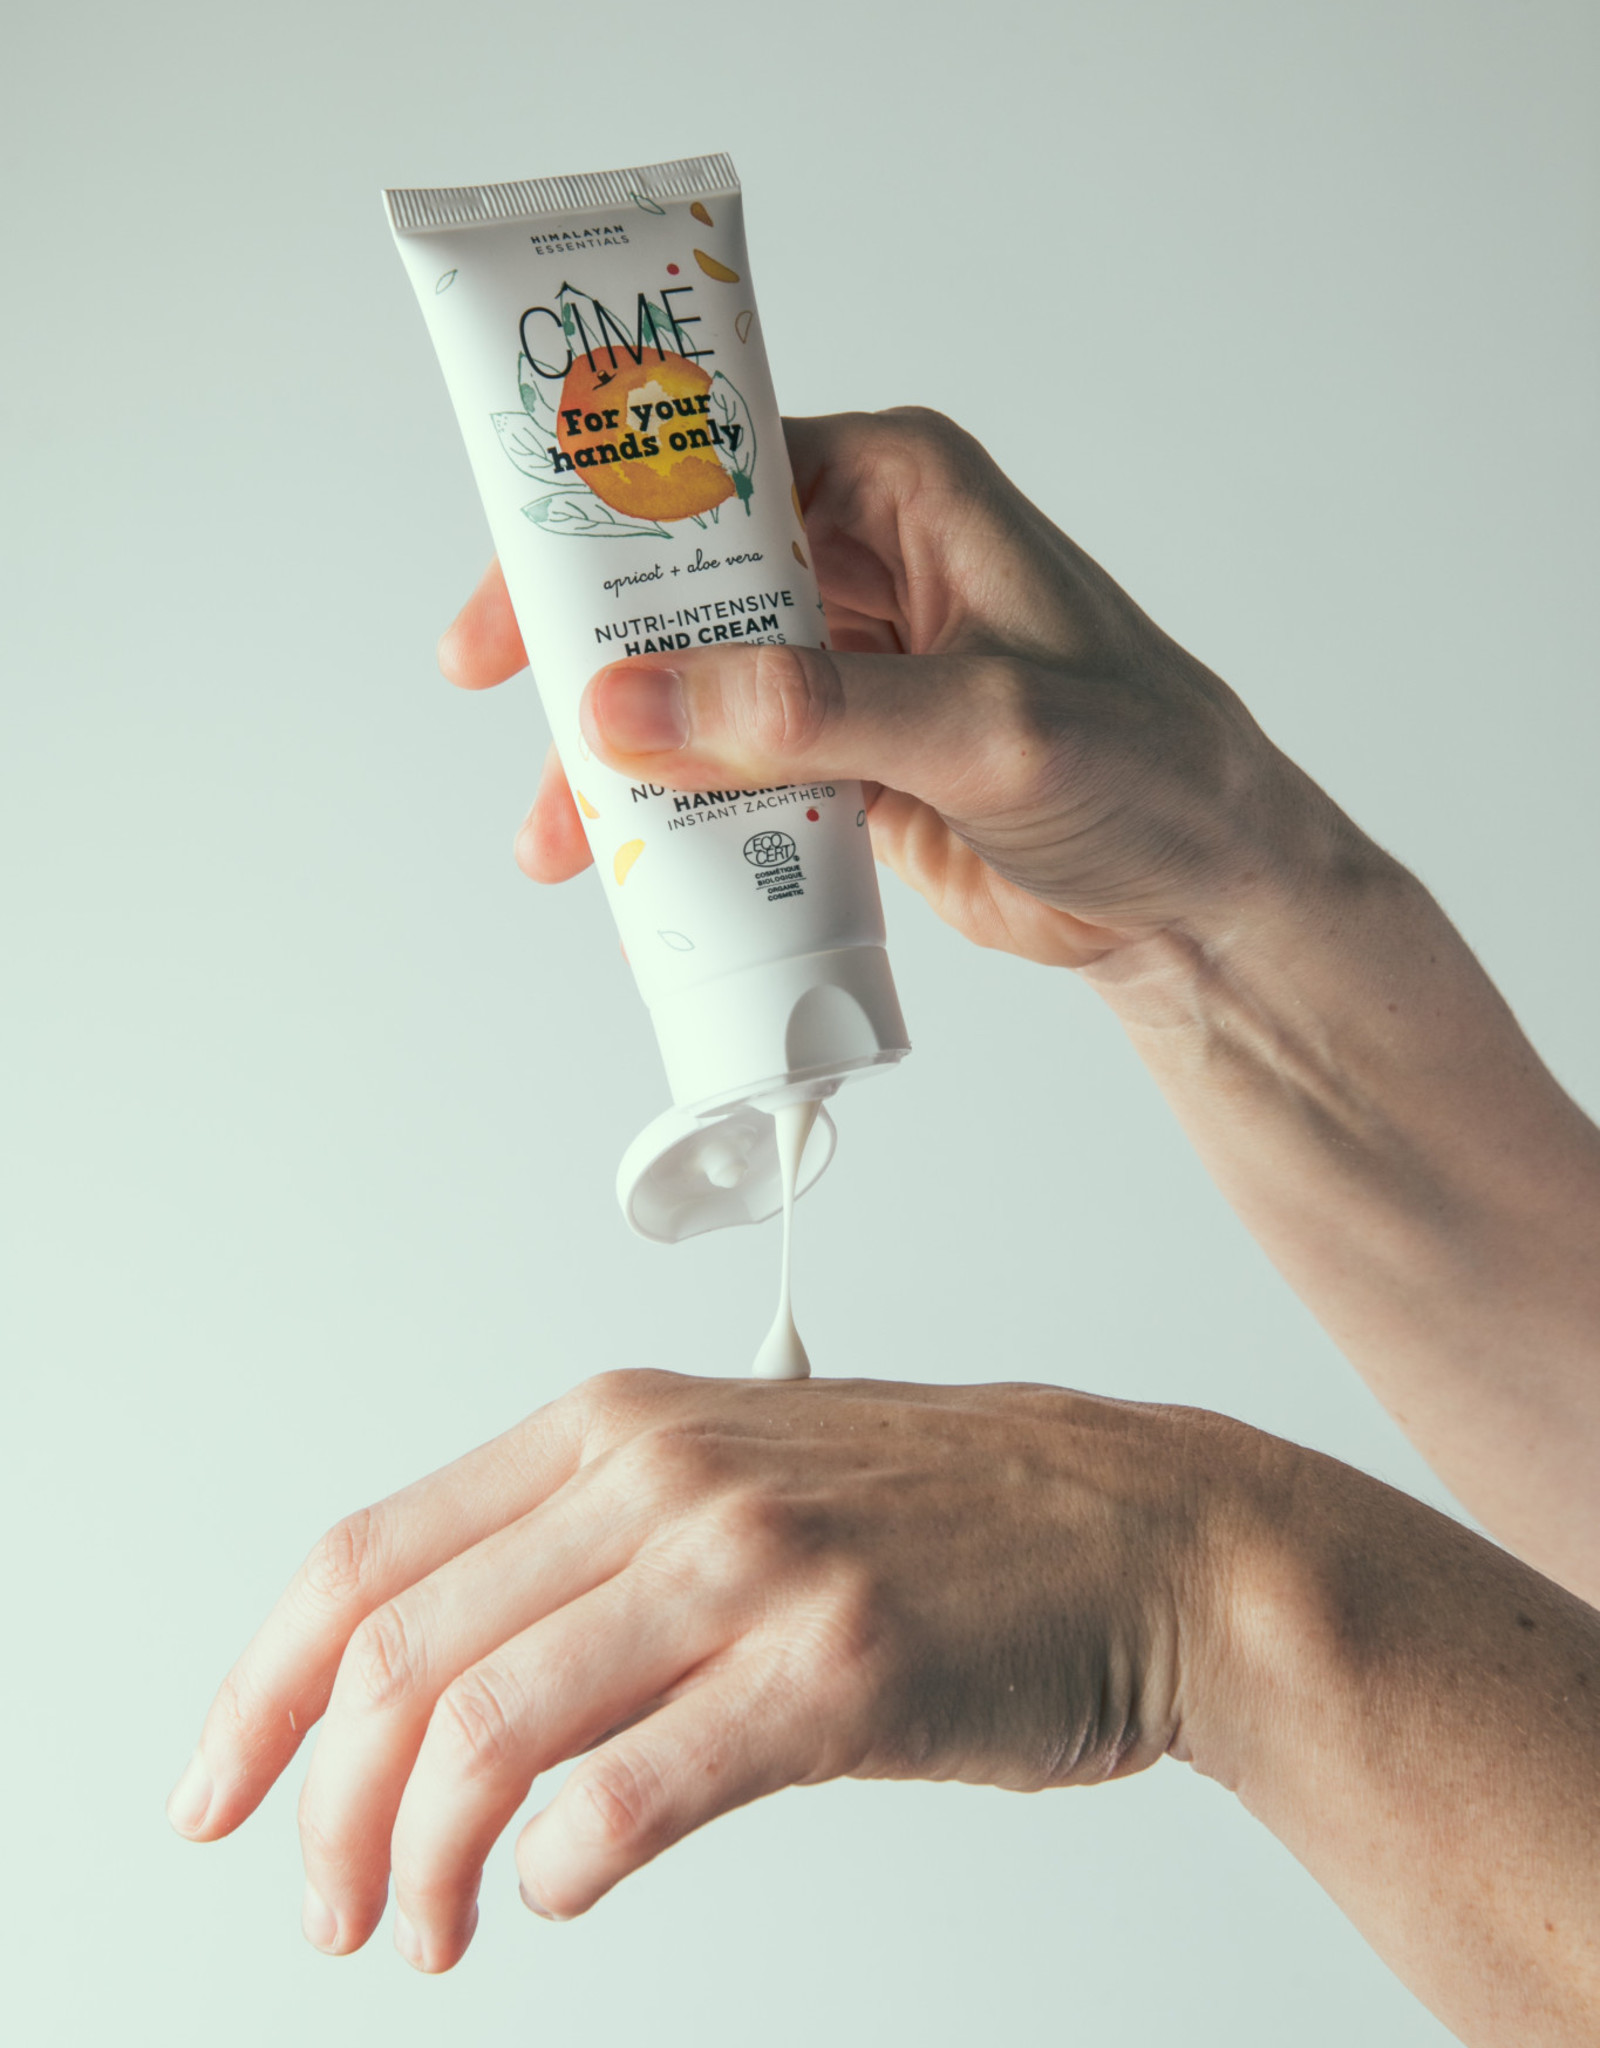 Cime For your hands only - Nutri-intensieve handcrème 75ml